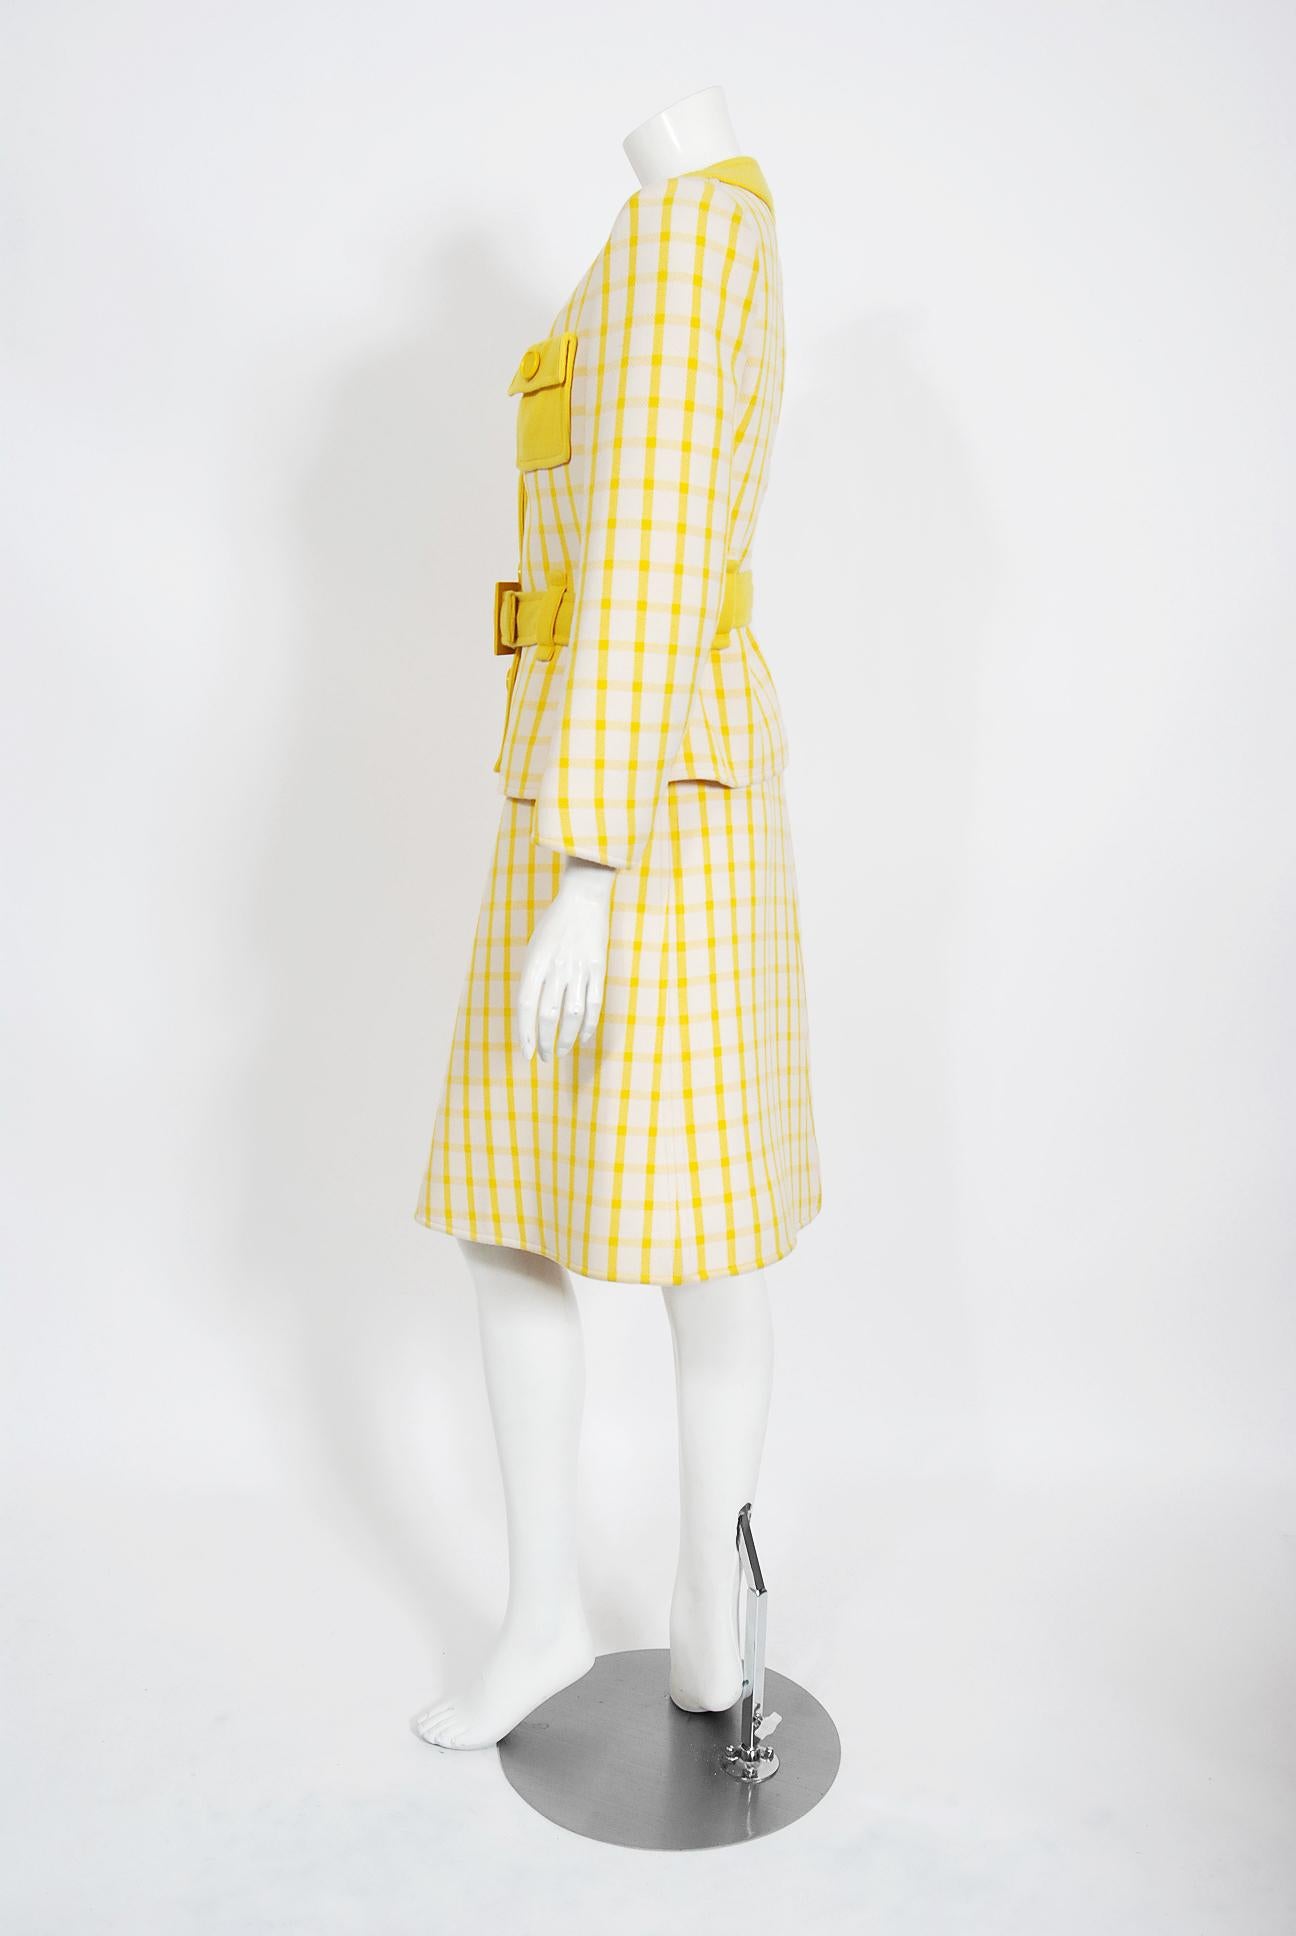 Women's Vintage 1967 Courreges Couture Yellow White Checkered Wool Belted Jacket & Skirt For Sale